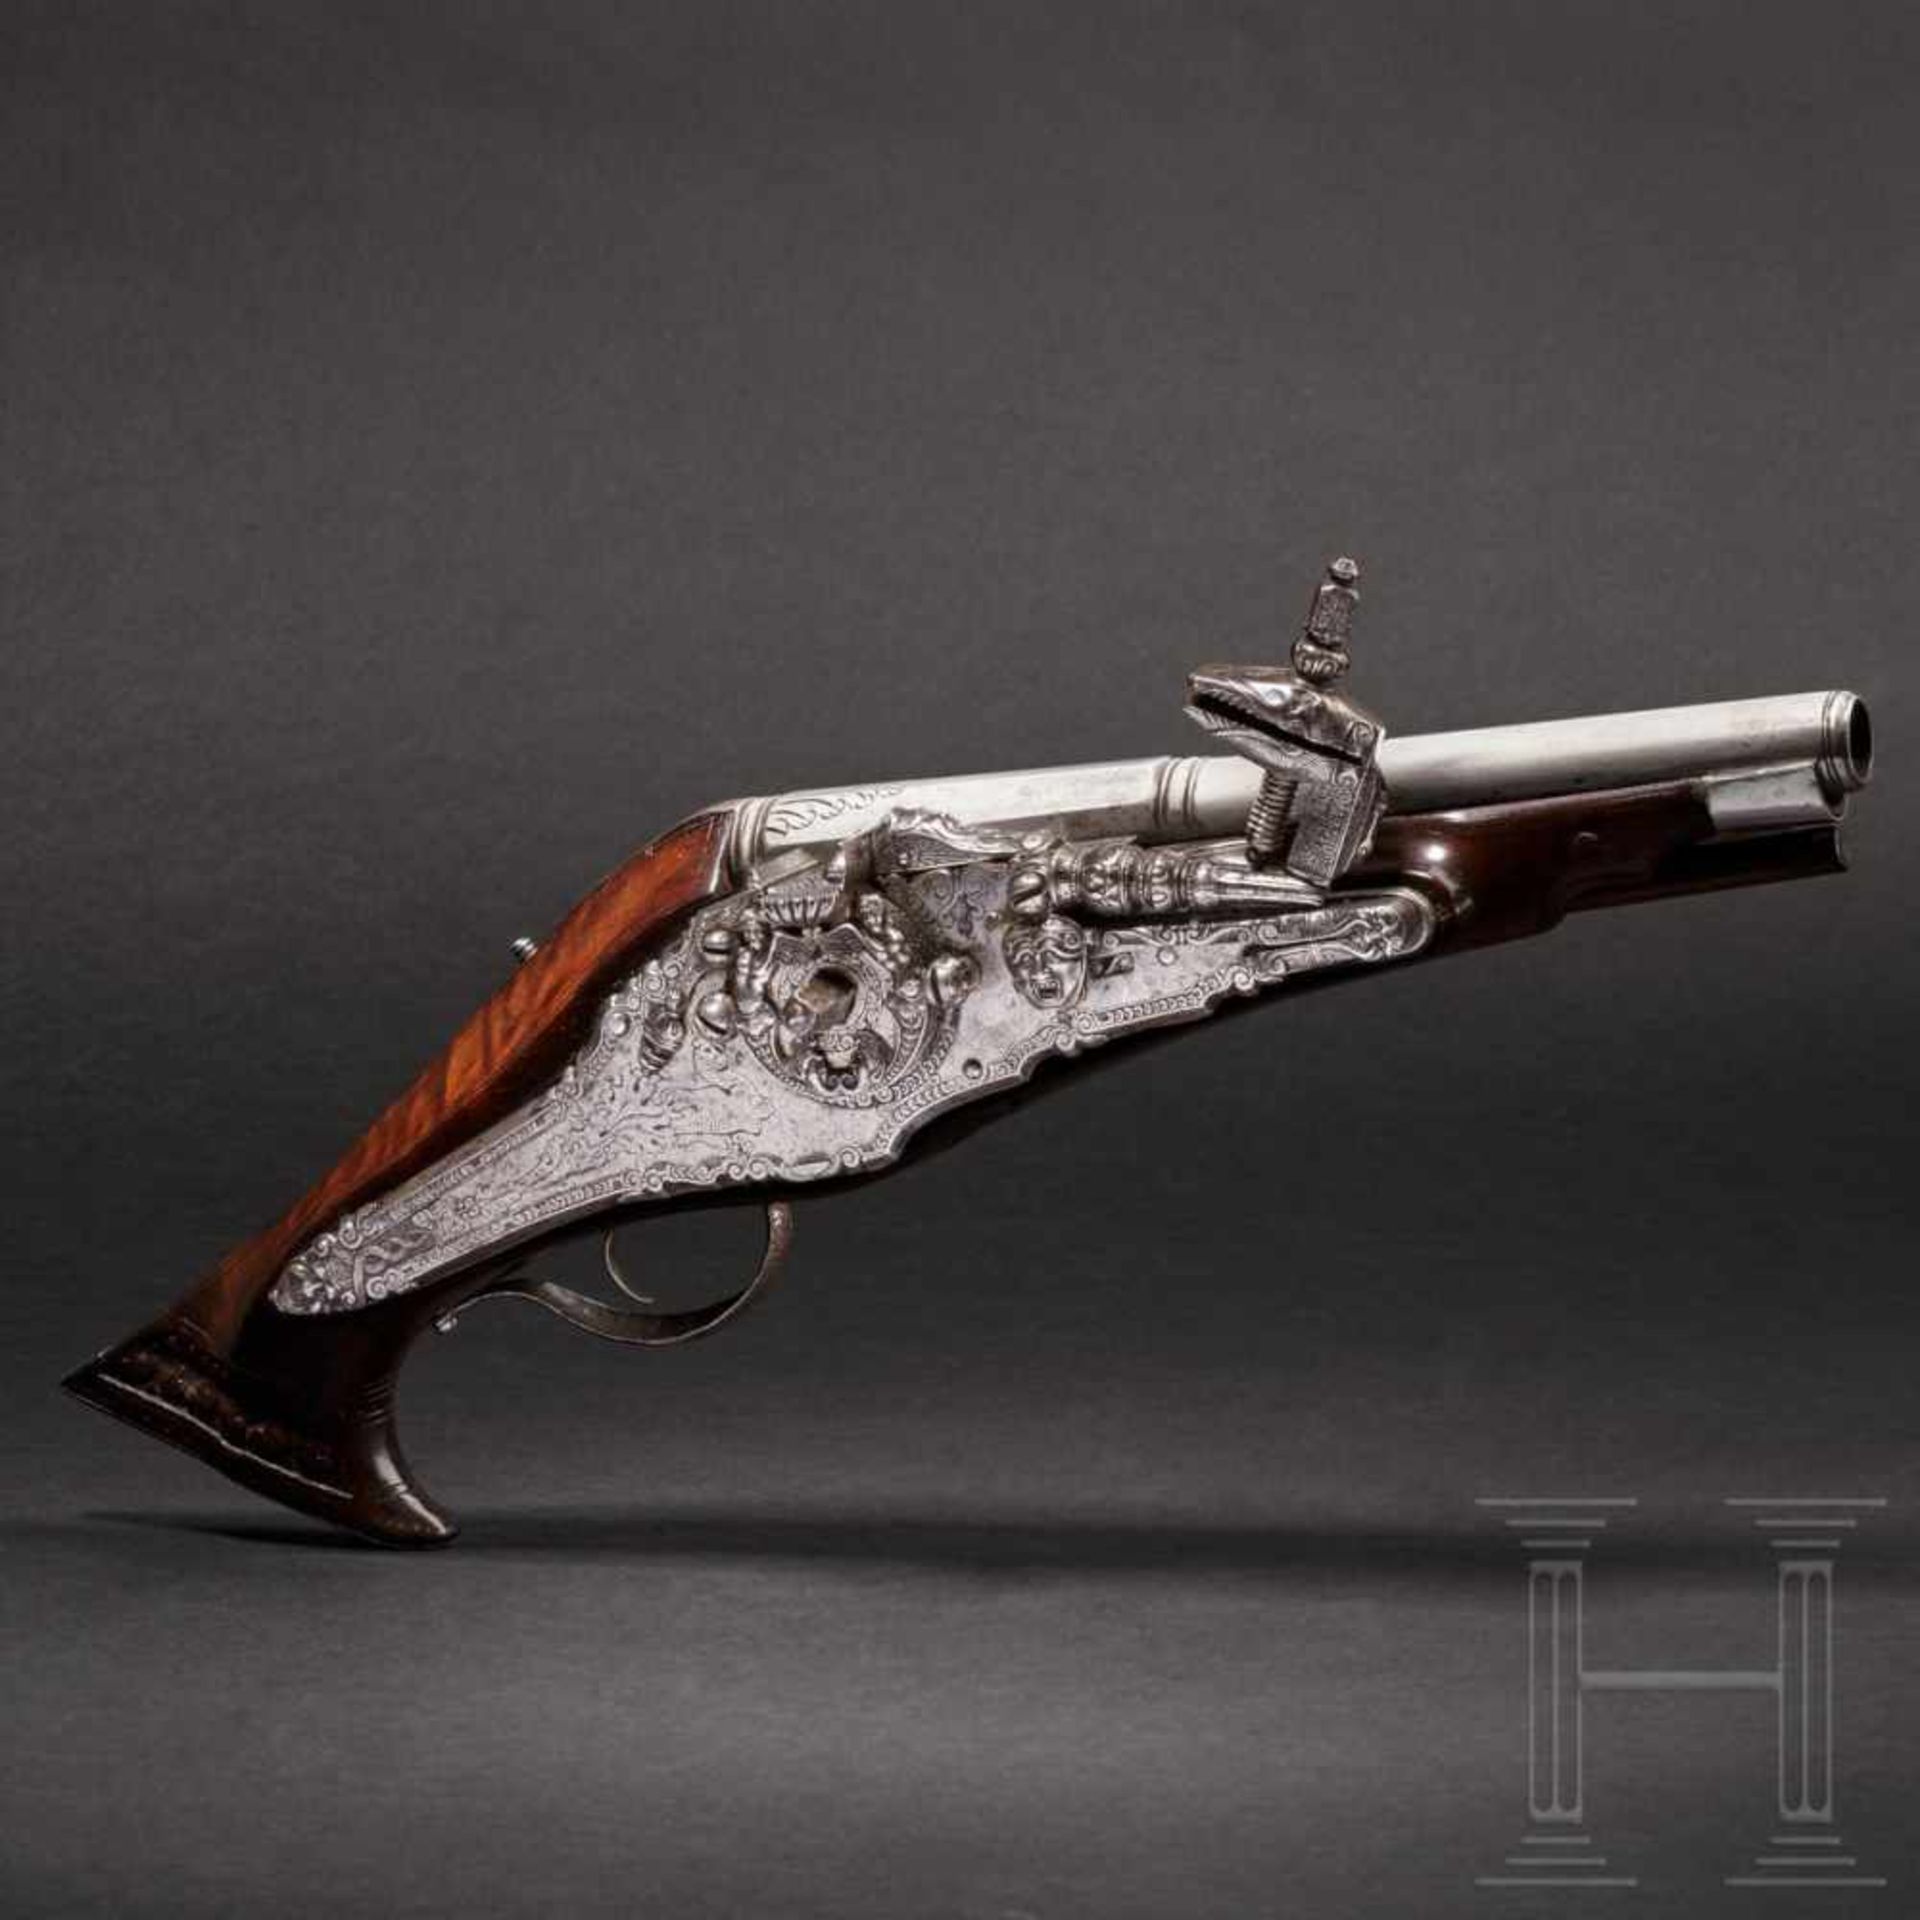 A rare North French wheellock pistol with an elaborately chased lock, circa 1570Two-stage smooth